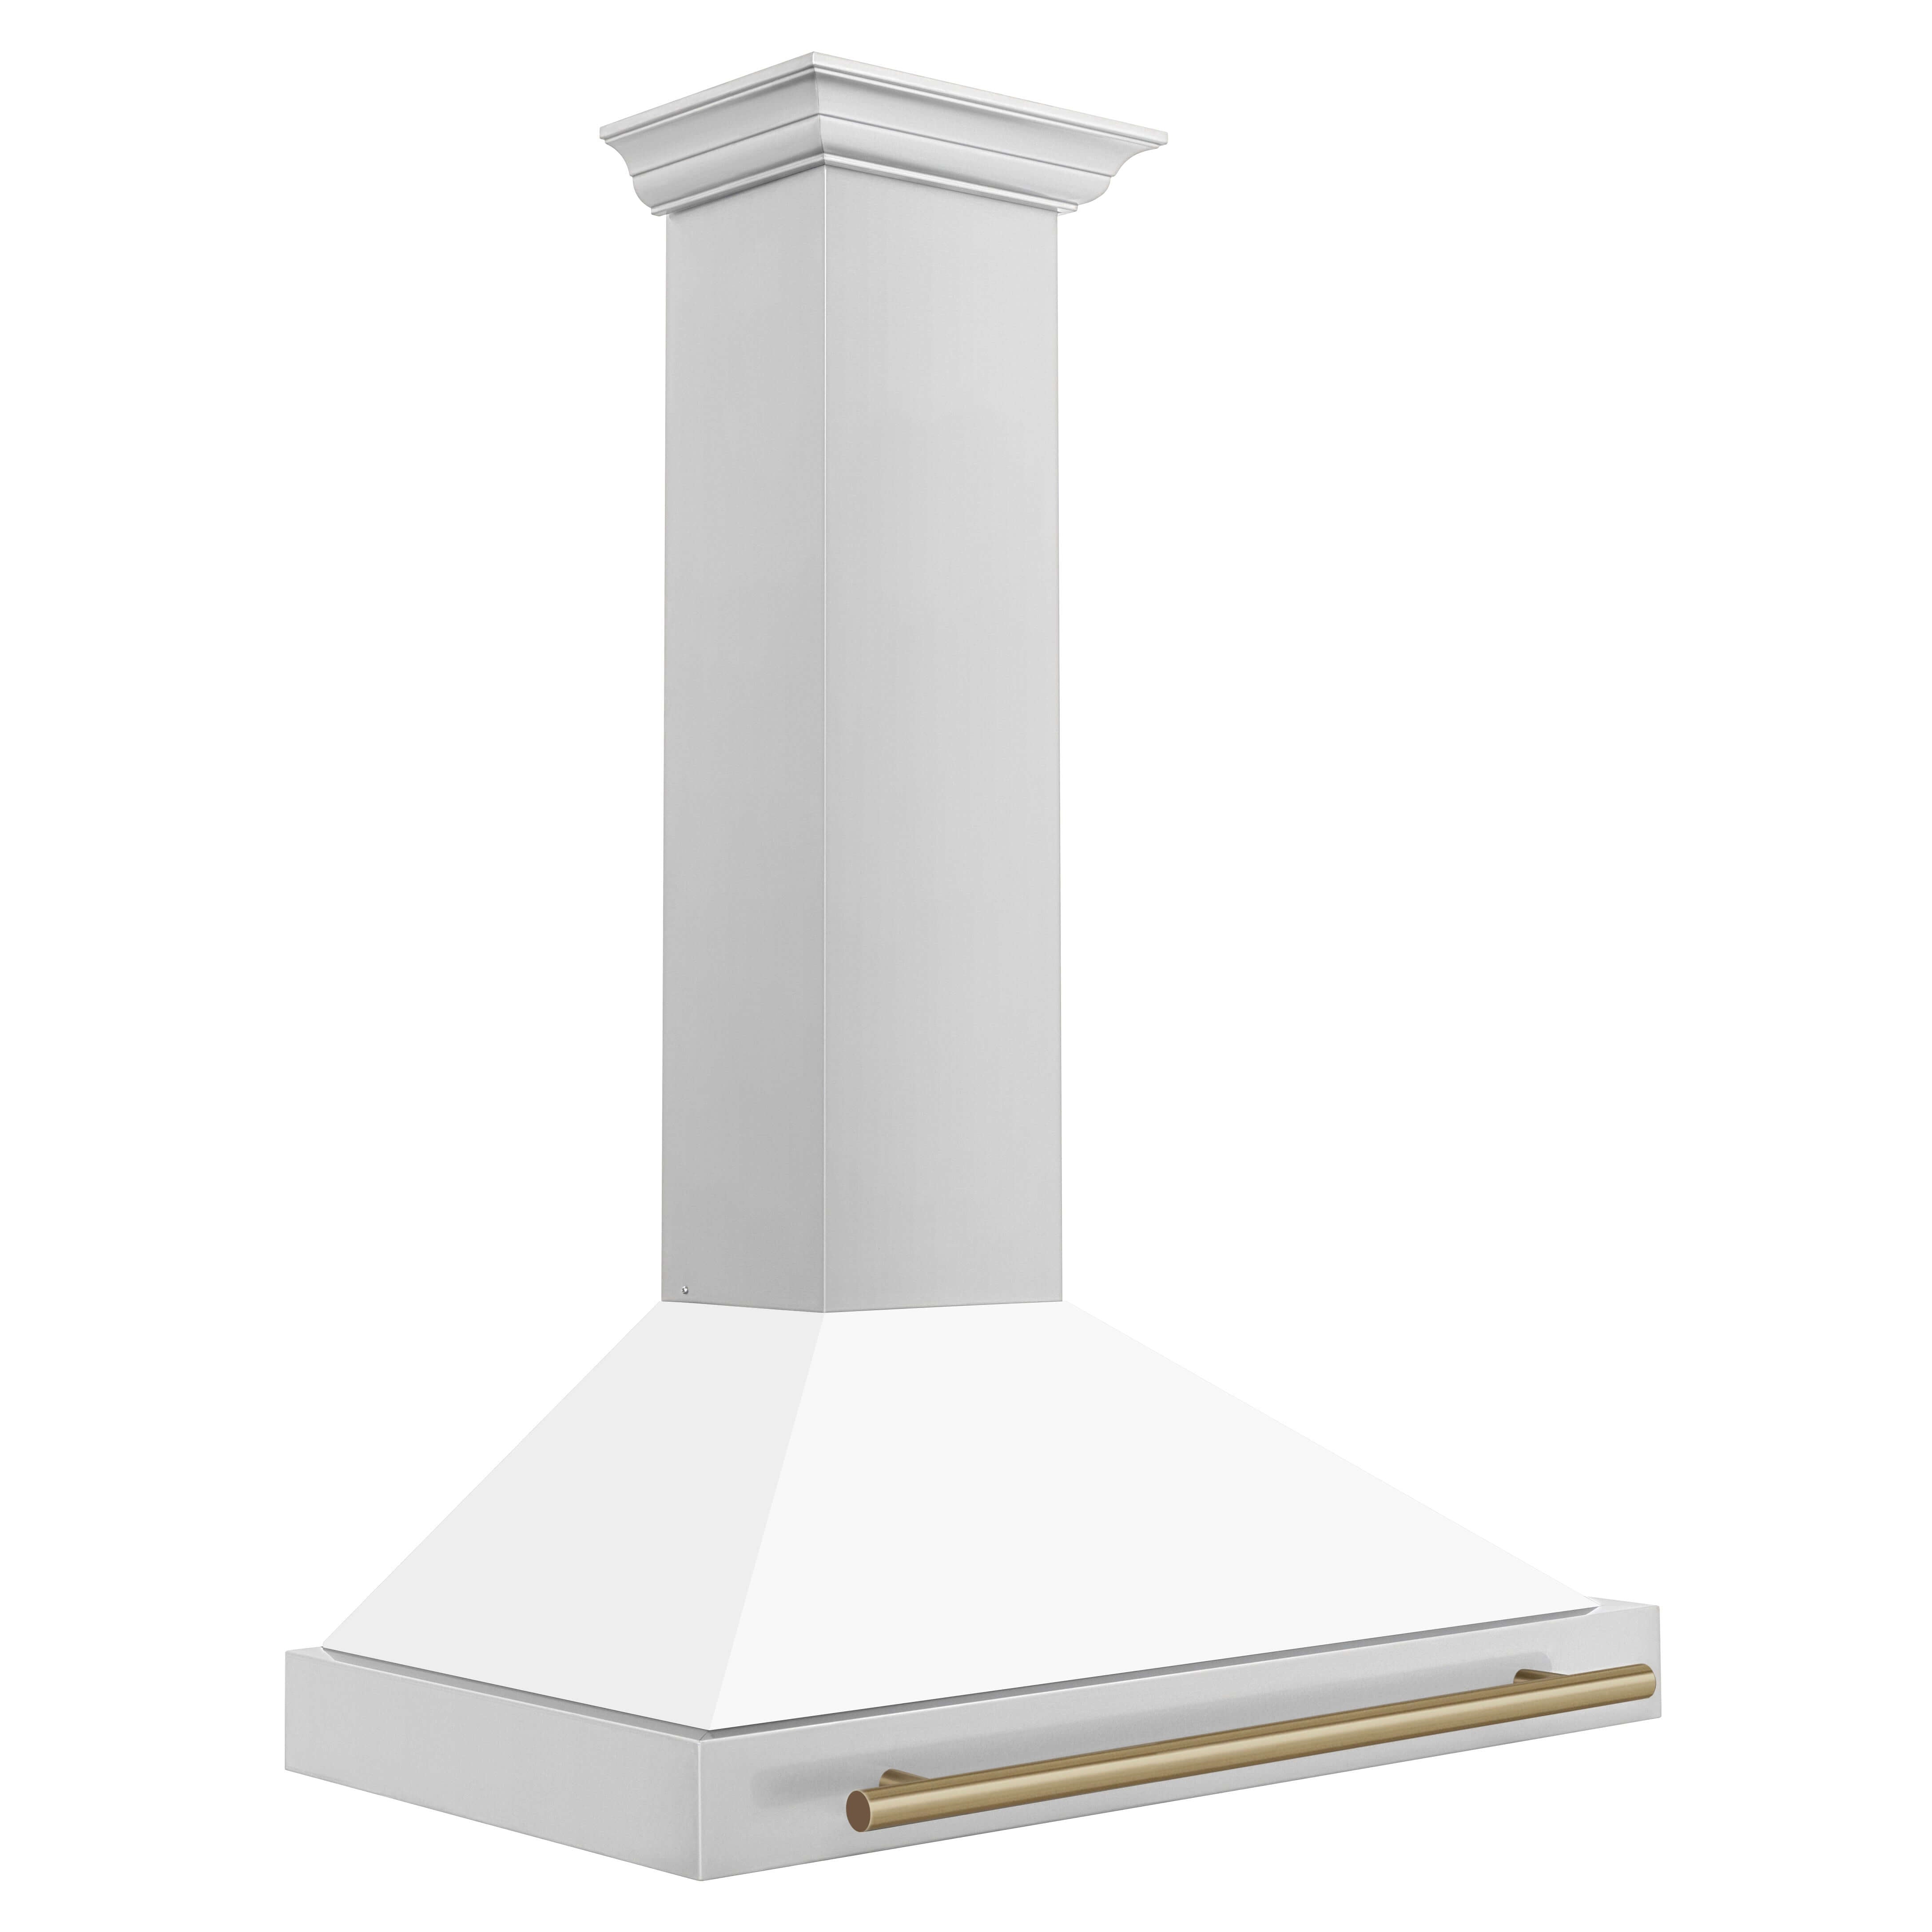  ZLINE 36 in. Autograph Edition Stainless Steel Range Hood with White Matte Shell and Champagne Bronze Accents (KB4STZ-WM36) features crown molding.